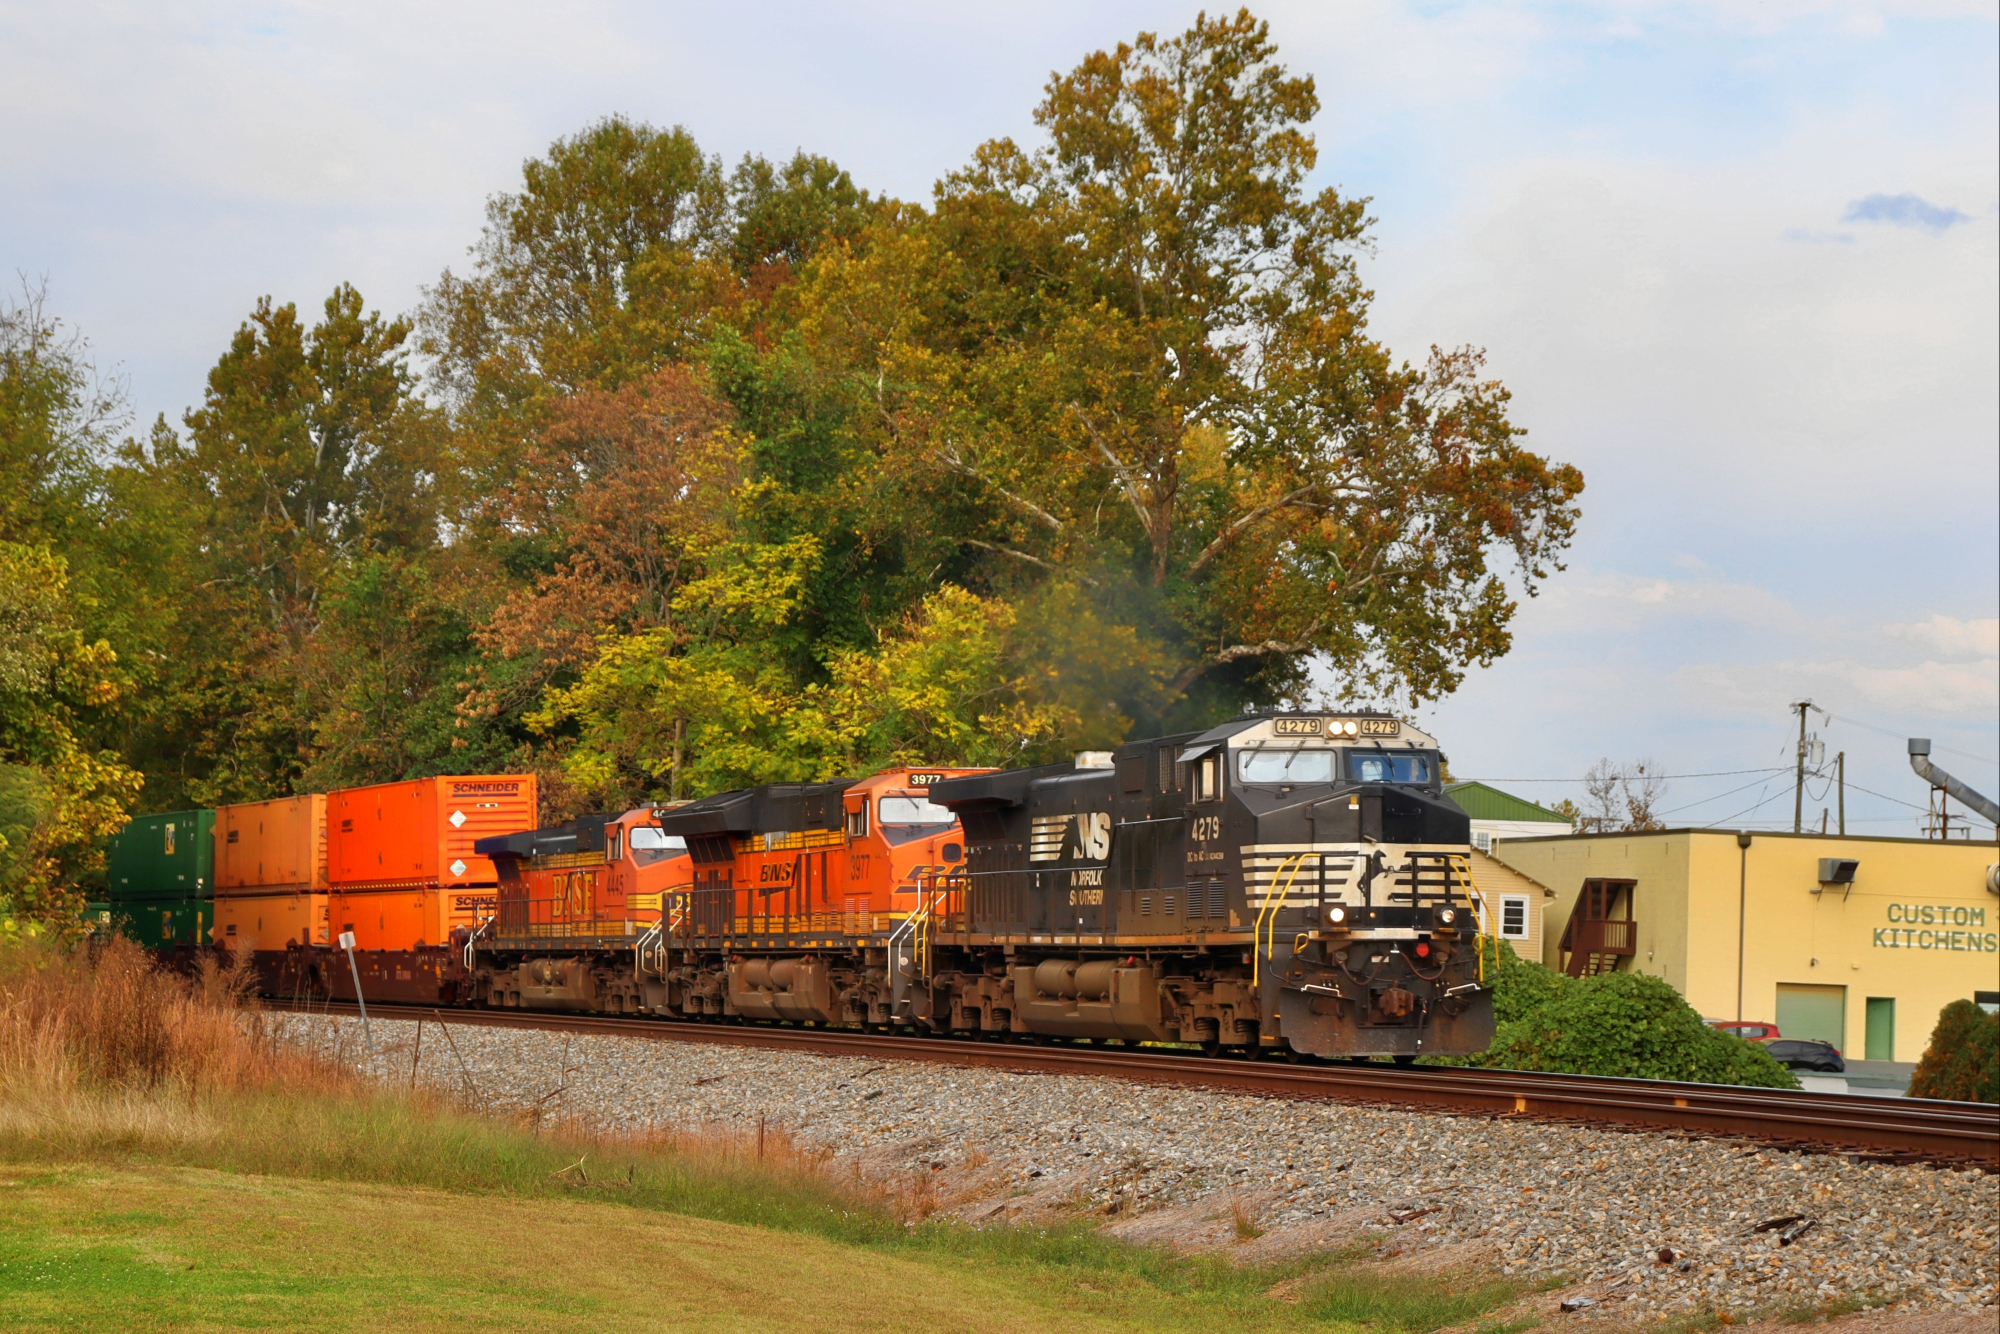 NS 4279 is a class GE AC44C6M and  is pictured in Charlottesville, VA, United States.  This was taken along the NS Washington District  on the Norfolk Southern. Photo Copyright: Robby Lefkowitz uploaded to Railroad Gallery on 11/15/2022. This photograph of NS 4279 was taken on Thursday, October 20, 2022. All Rights Reserved. 